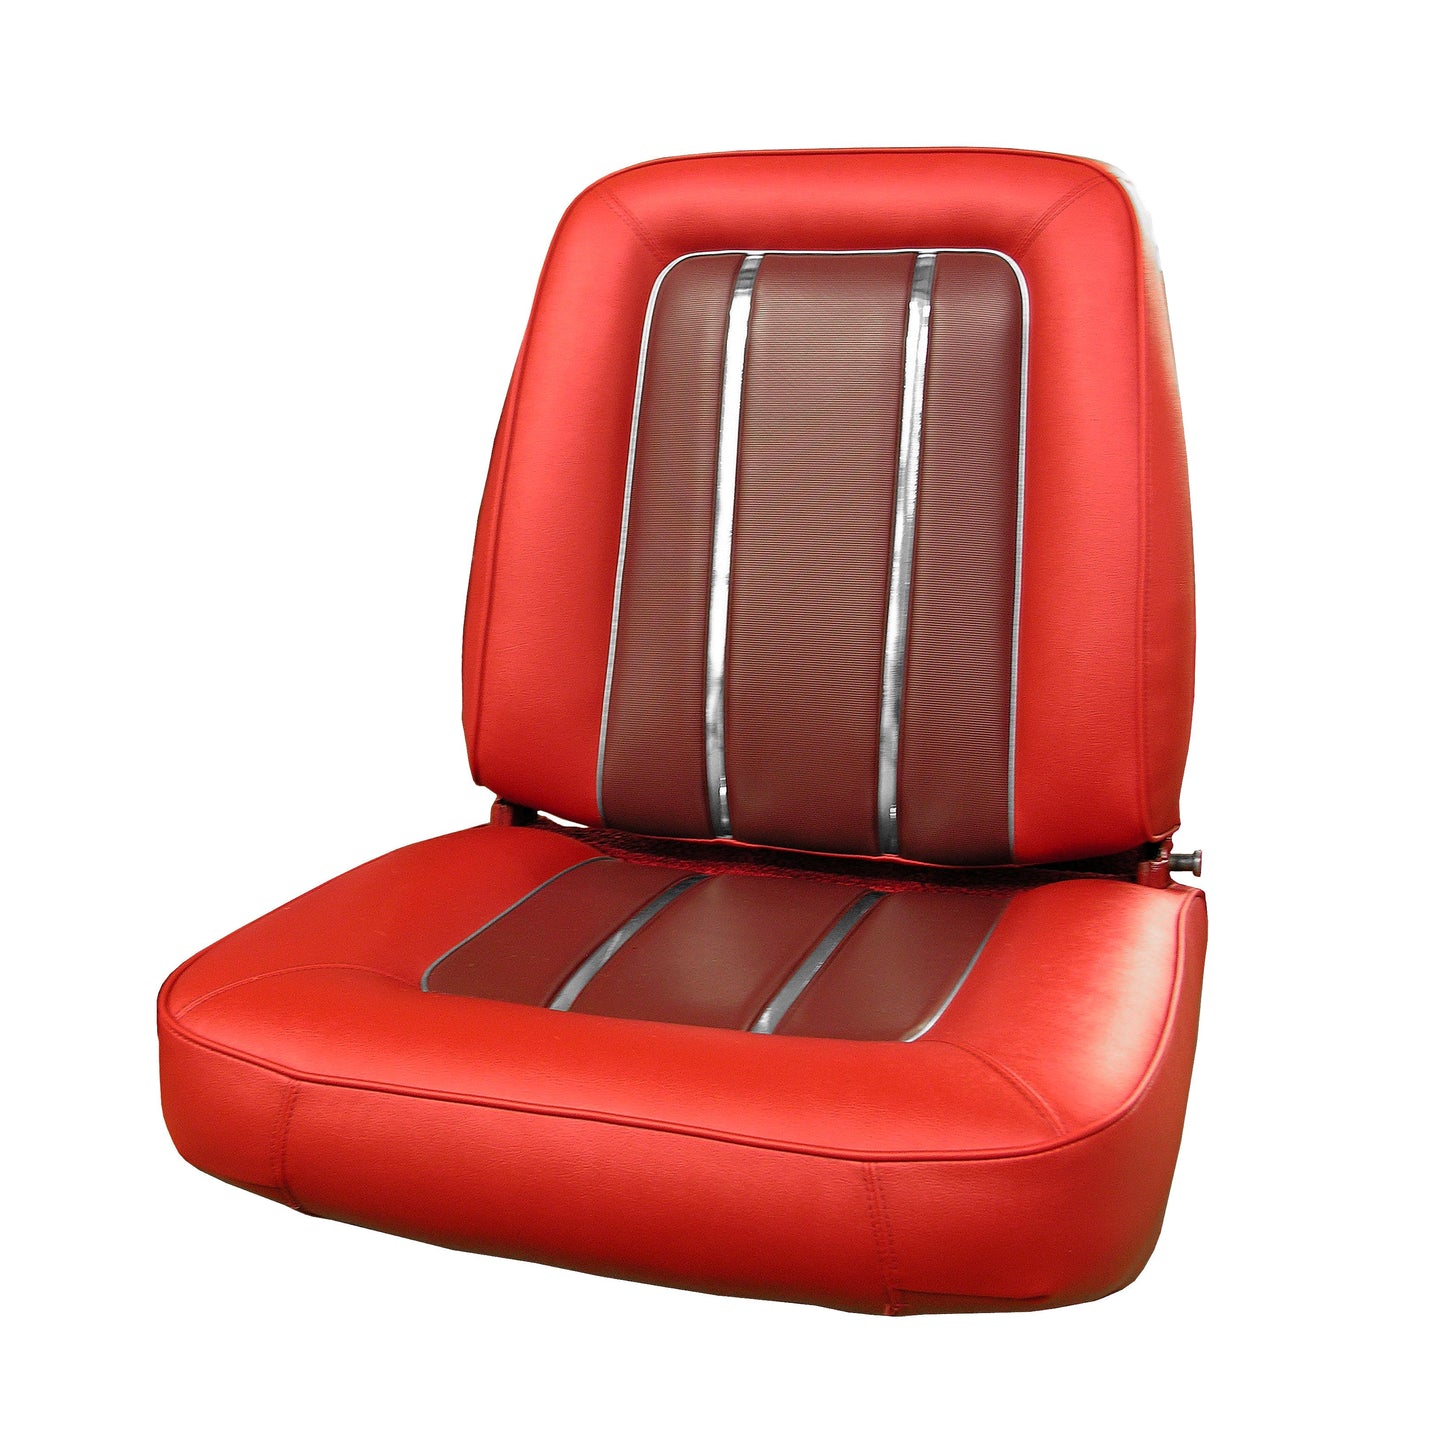 64 VALIANT SIGNET BUCKET SEAT UPH-DK RED/RED W/ SILVR TINSEL